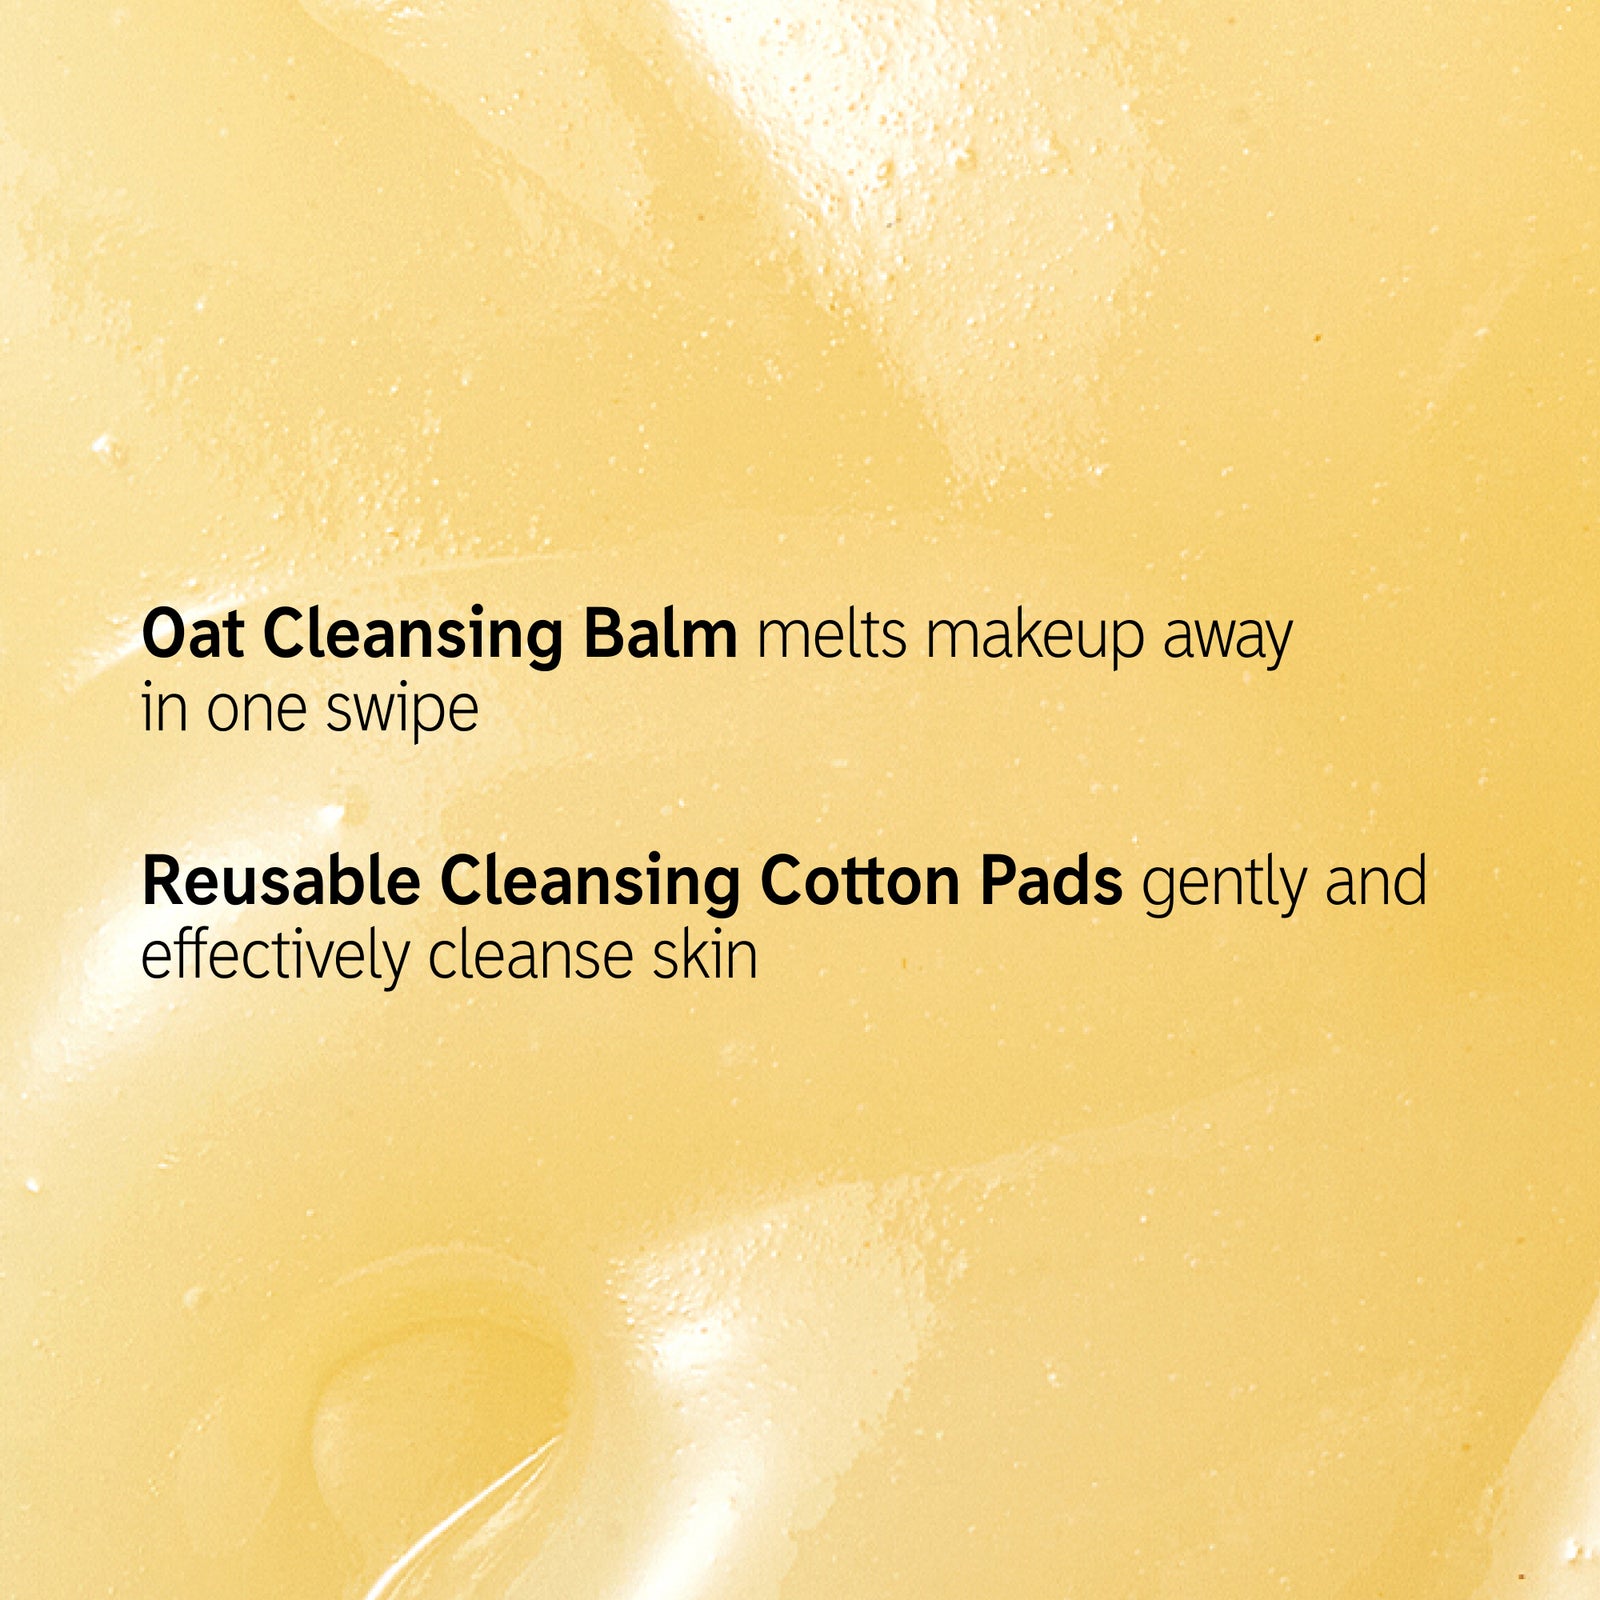 Goop background with text overlay that reads 'Oat Cleansing Balm melts makeup away in one swipe. Reuseable Cleansing Cotton Pads gently and effectively cleanse skin'